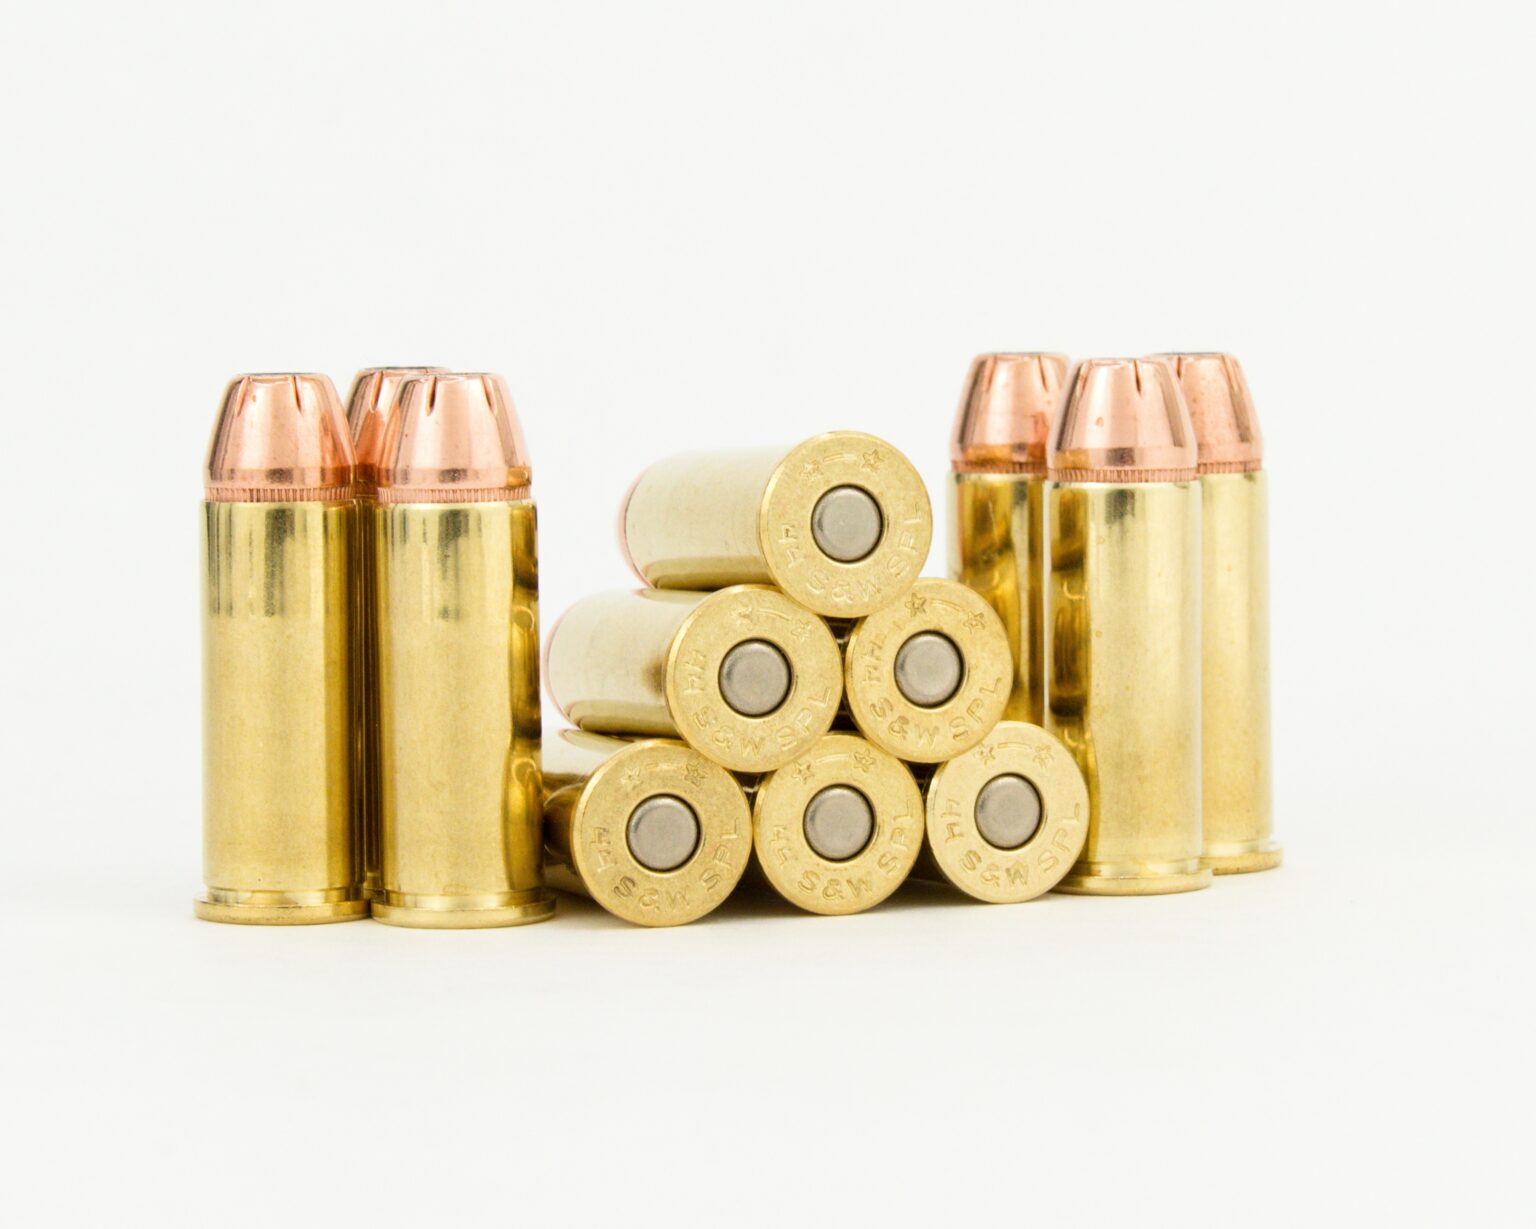 44 S&W Special Ammunition with 240 Grain Hornady XTP Hollow Point ...